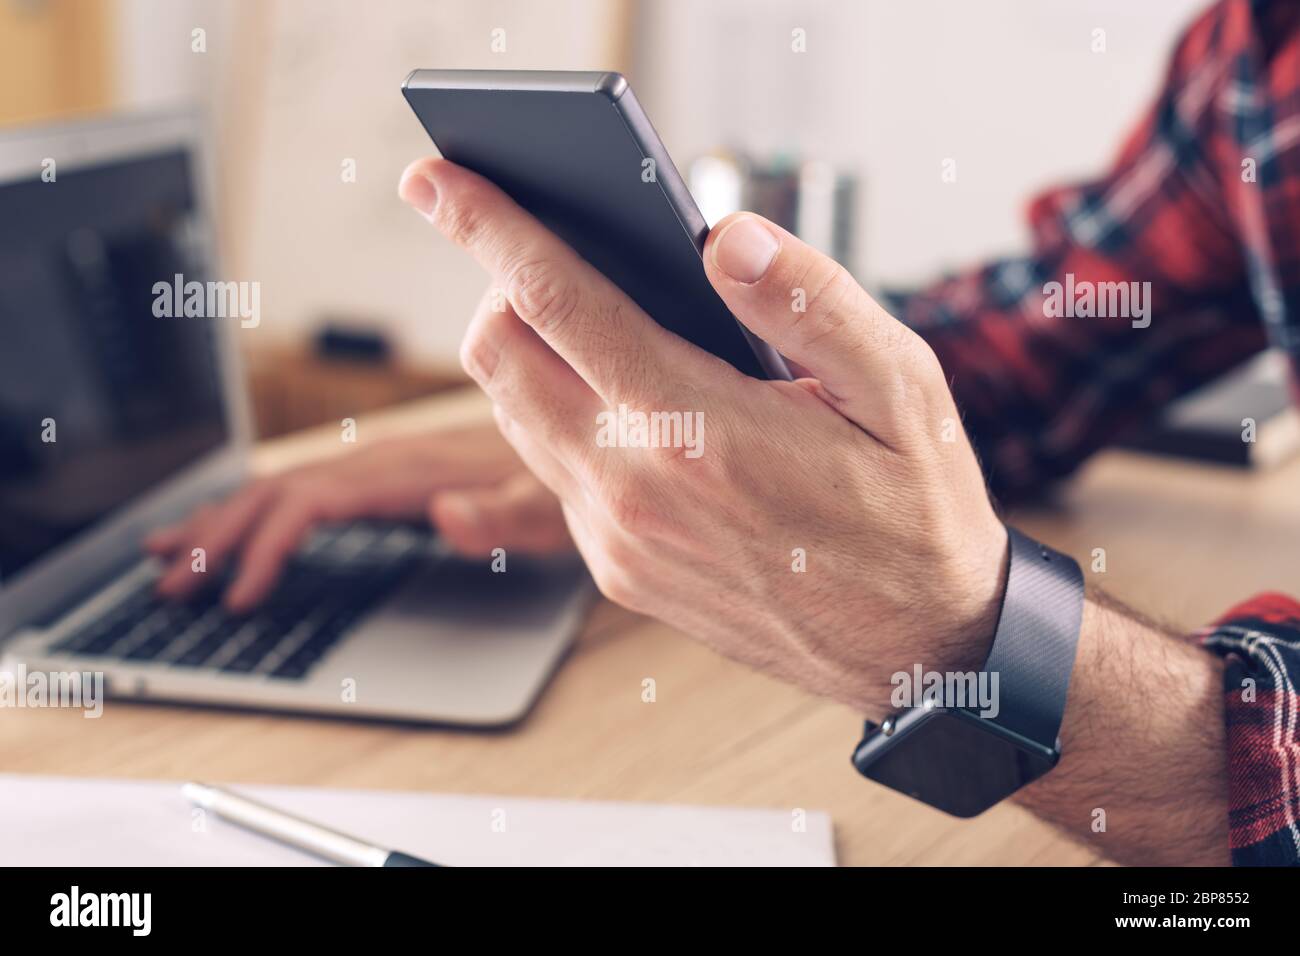 Using smart phone and laptop computer in home office, close up of male hands using modern electronics for telecommuting, selective focus Stock Photo